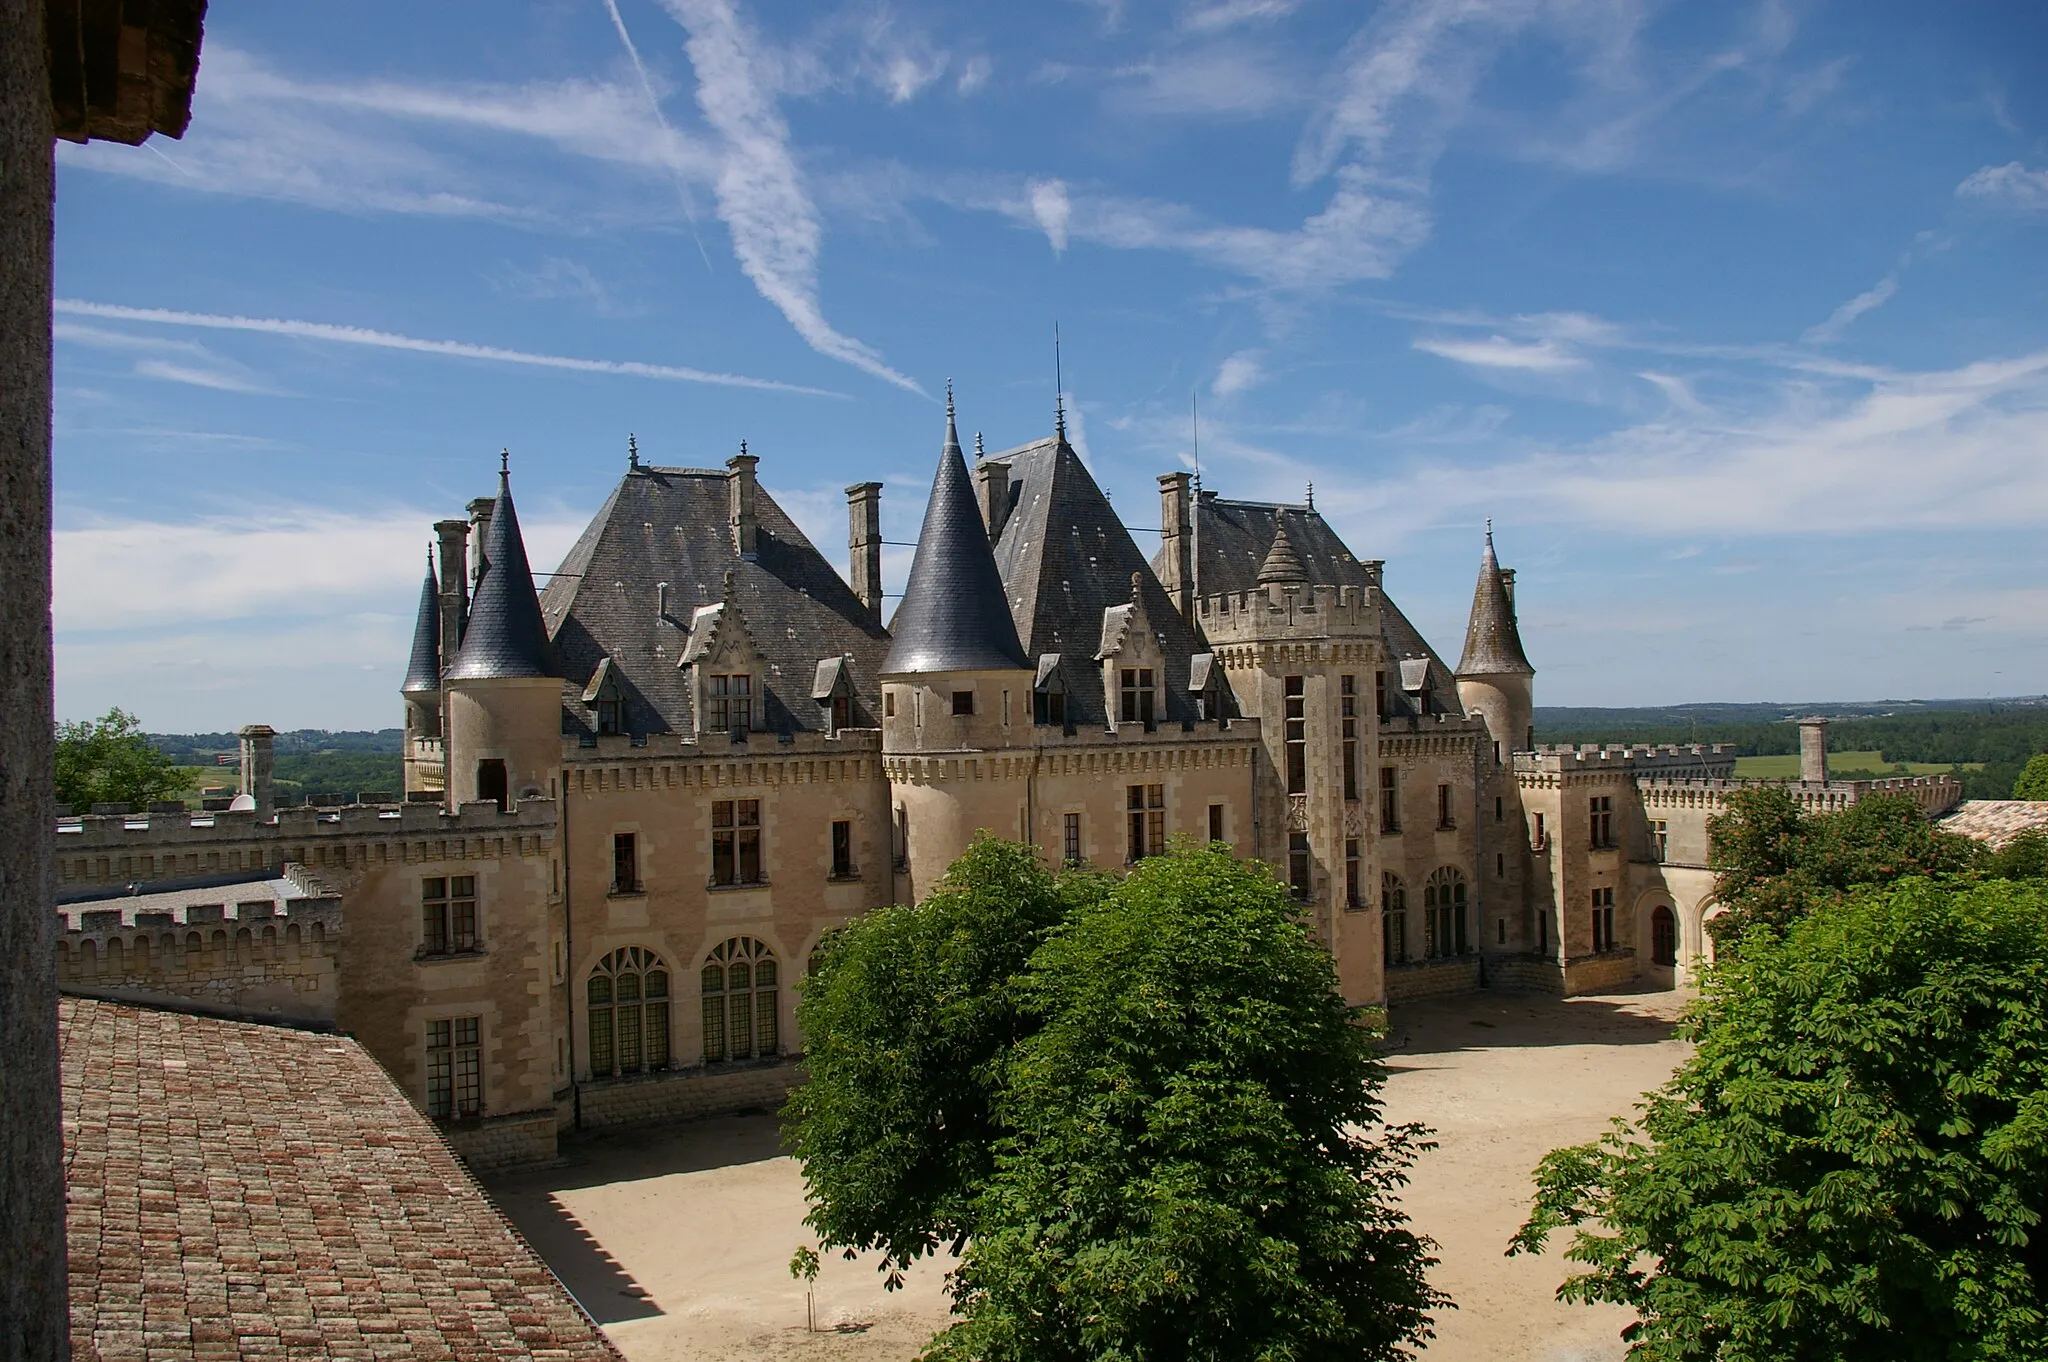 Photo showing: The fourteenth-century château, in which Michel de Montaigne was born and died, was burnt down in 1885. But soon after rebuilt in a similar style by the Montaign family. Michel Eyquem de Montaigne (February 28, 1533 – September 13, 1592) was an influential French Renaissance writer, generally considered to be the inventor of the personal essay. w:Michel de Montaigne

Another view: Flickr